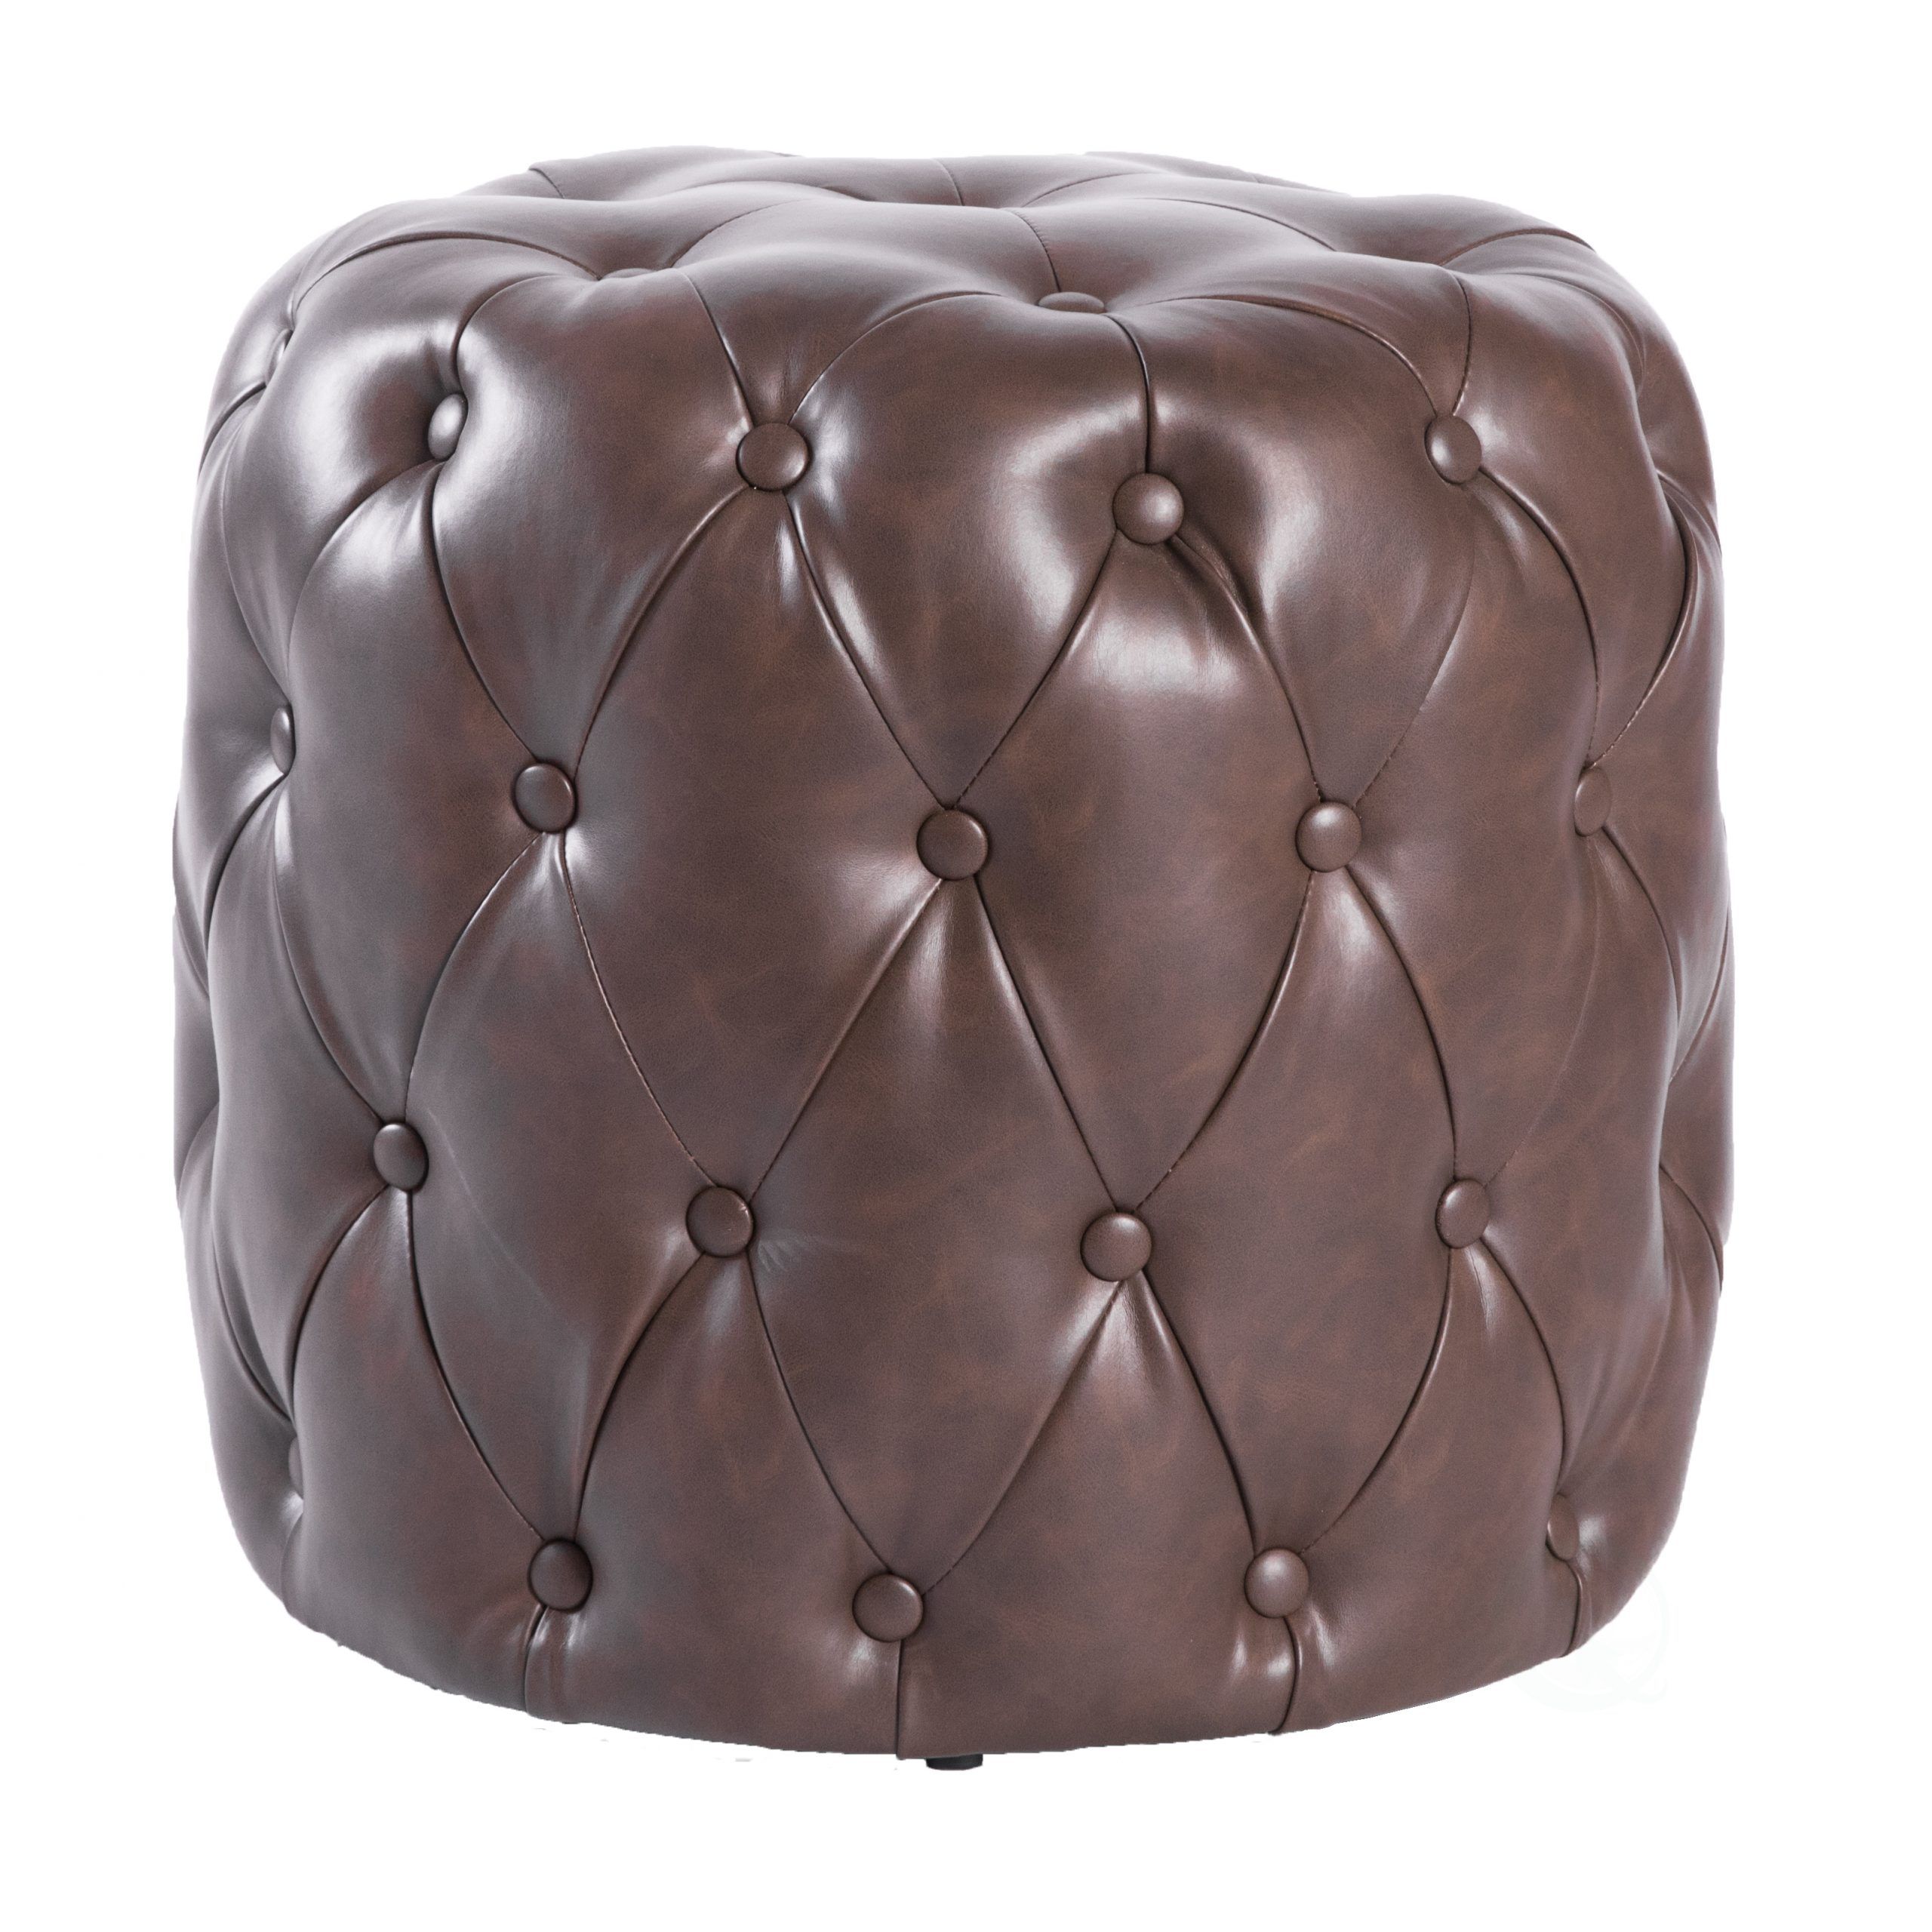 New Bold Tones Tufted Modern Leather Round Ottoman Stool, Brown | Ebay Inside Round Beige Faux Leather Ottomans With Pull Tab (View 17 of 20)